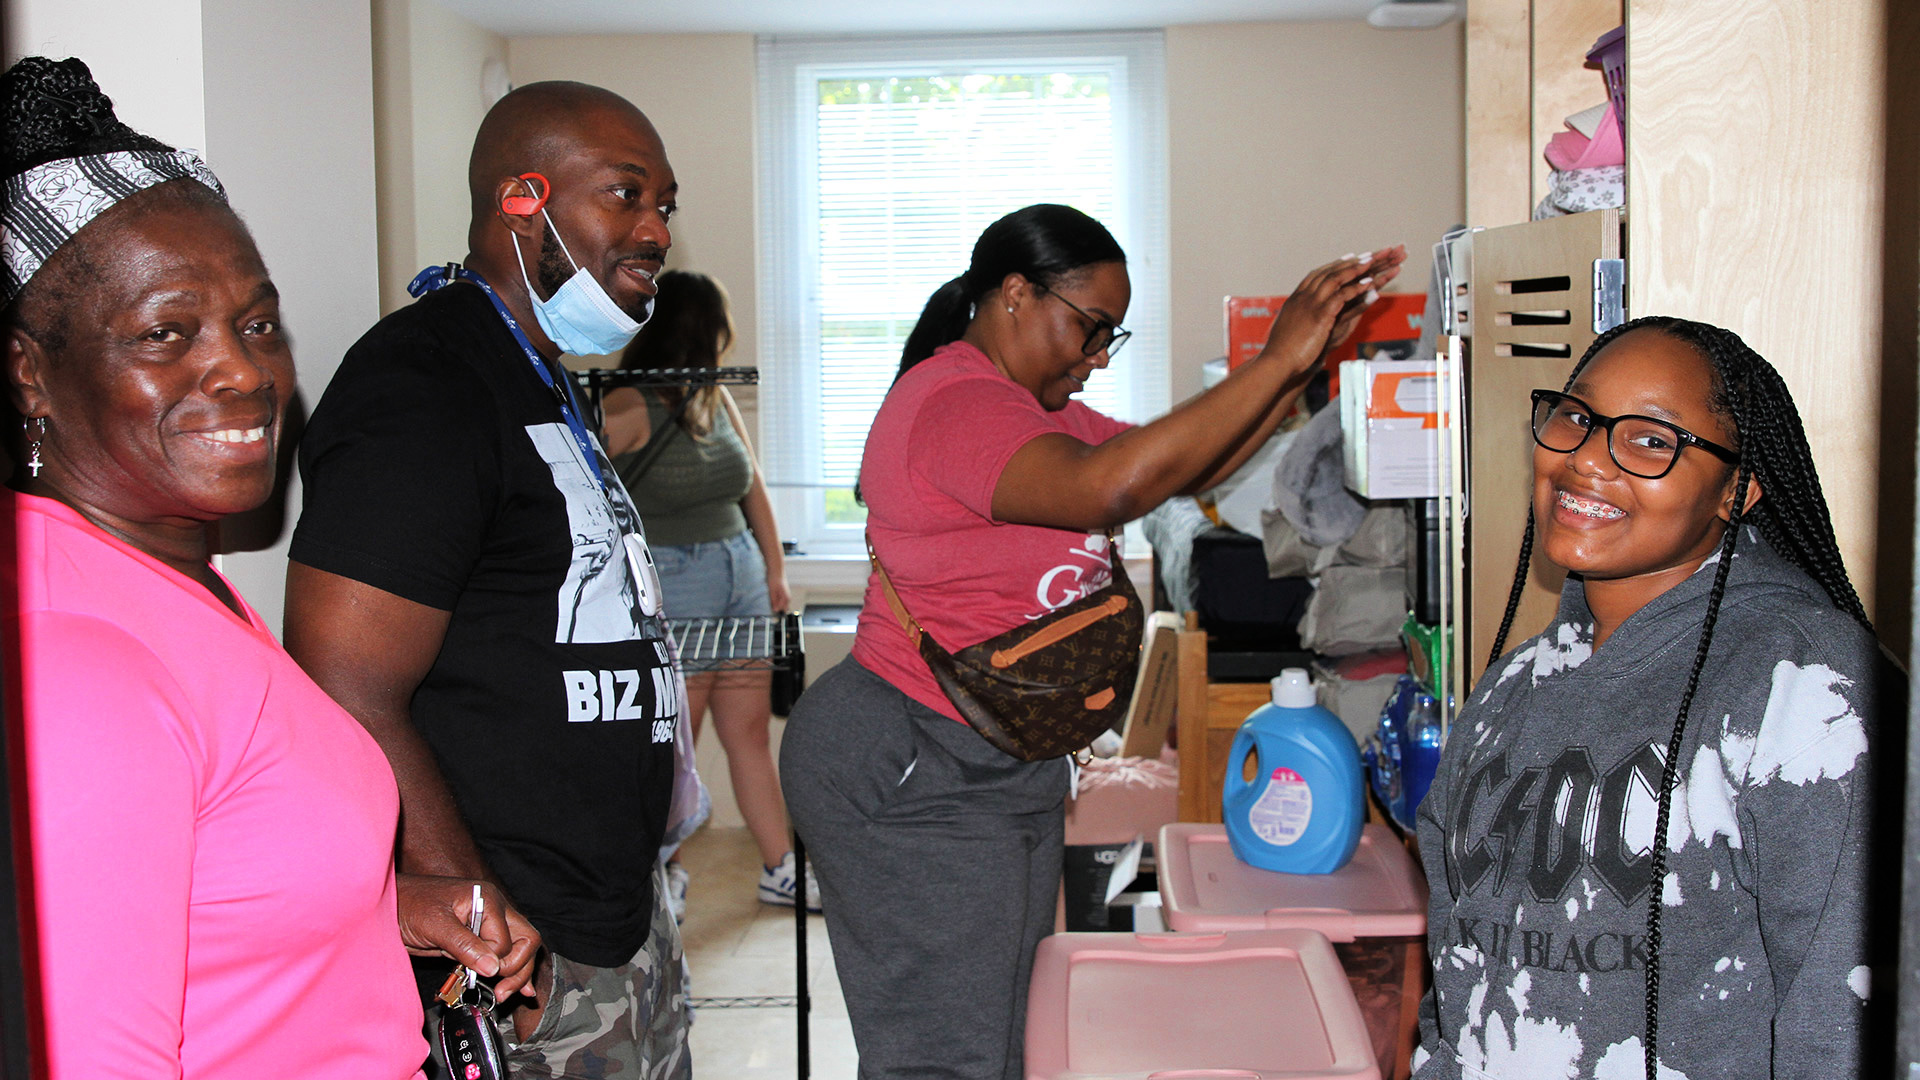 A student and friend smile at the camera, as other friends and family members place items in the student's res-hall room.